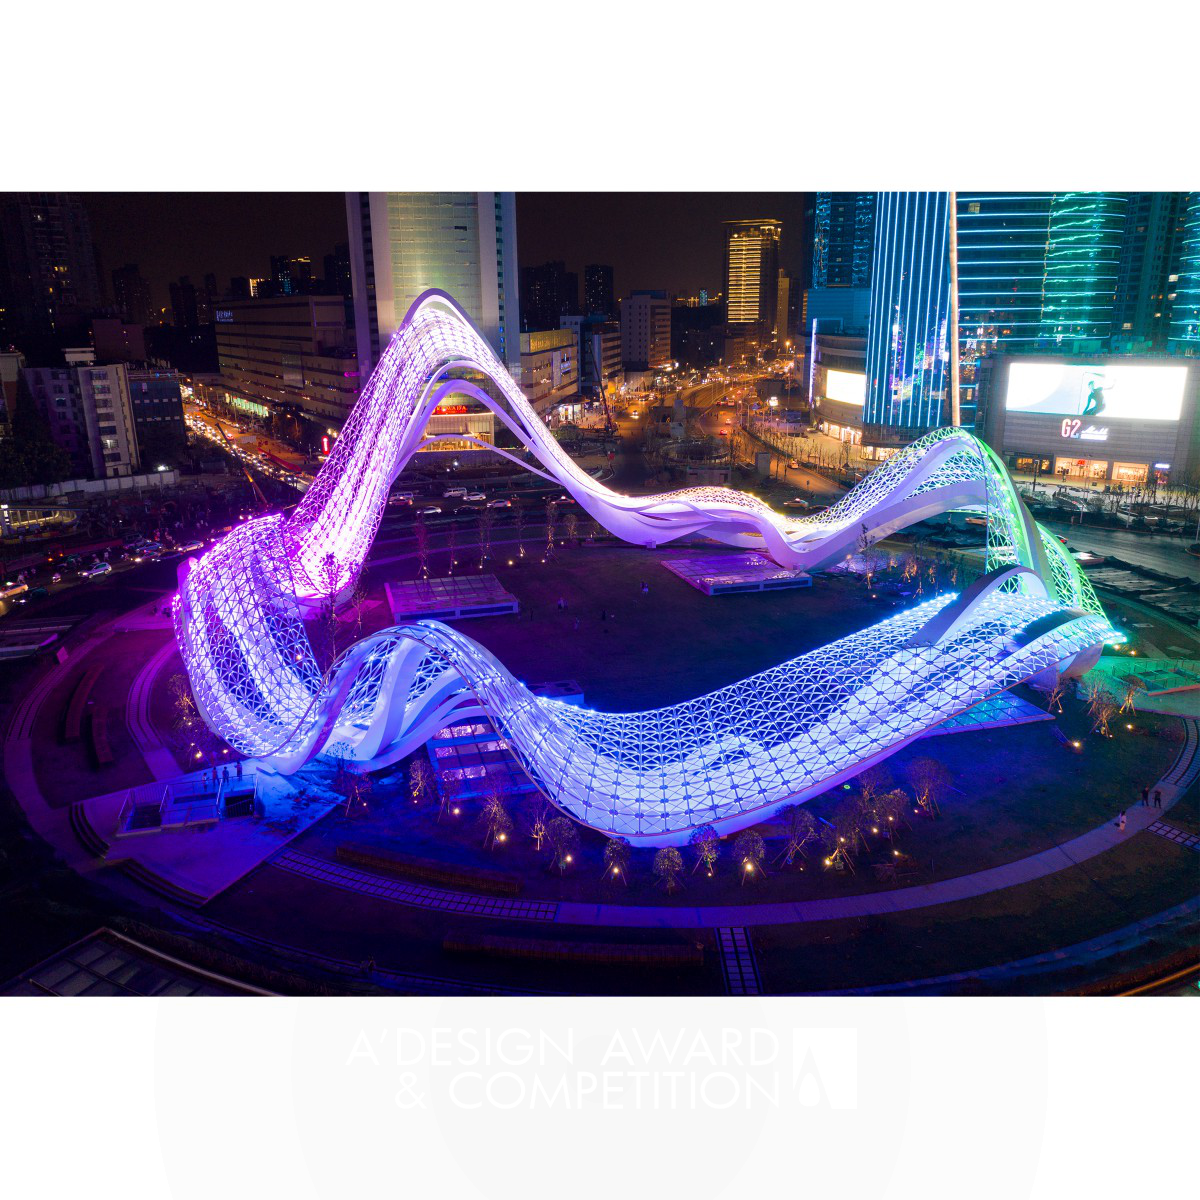 CAPA Giant Installation Artwork with Lights